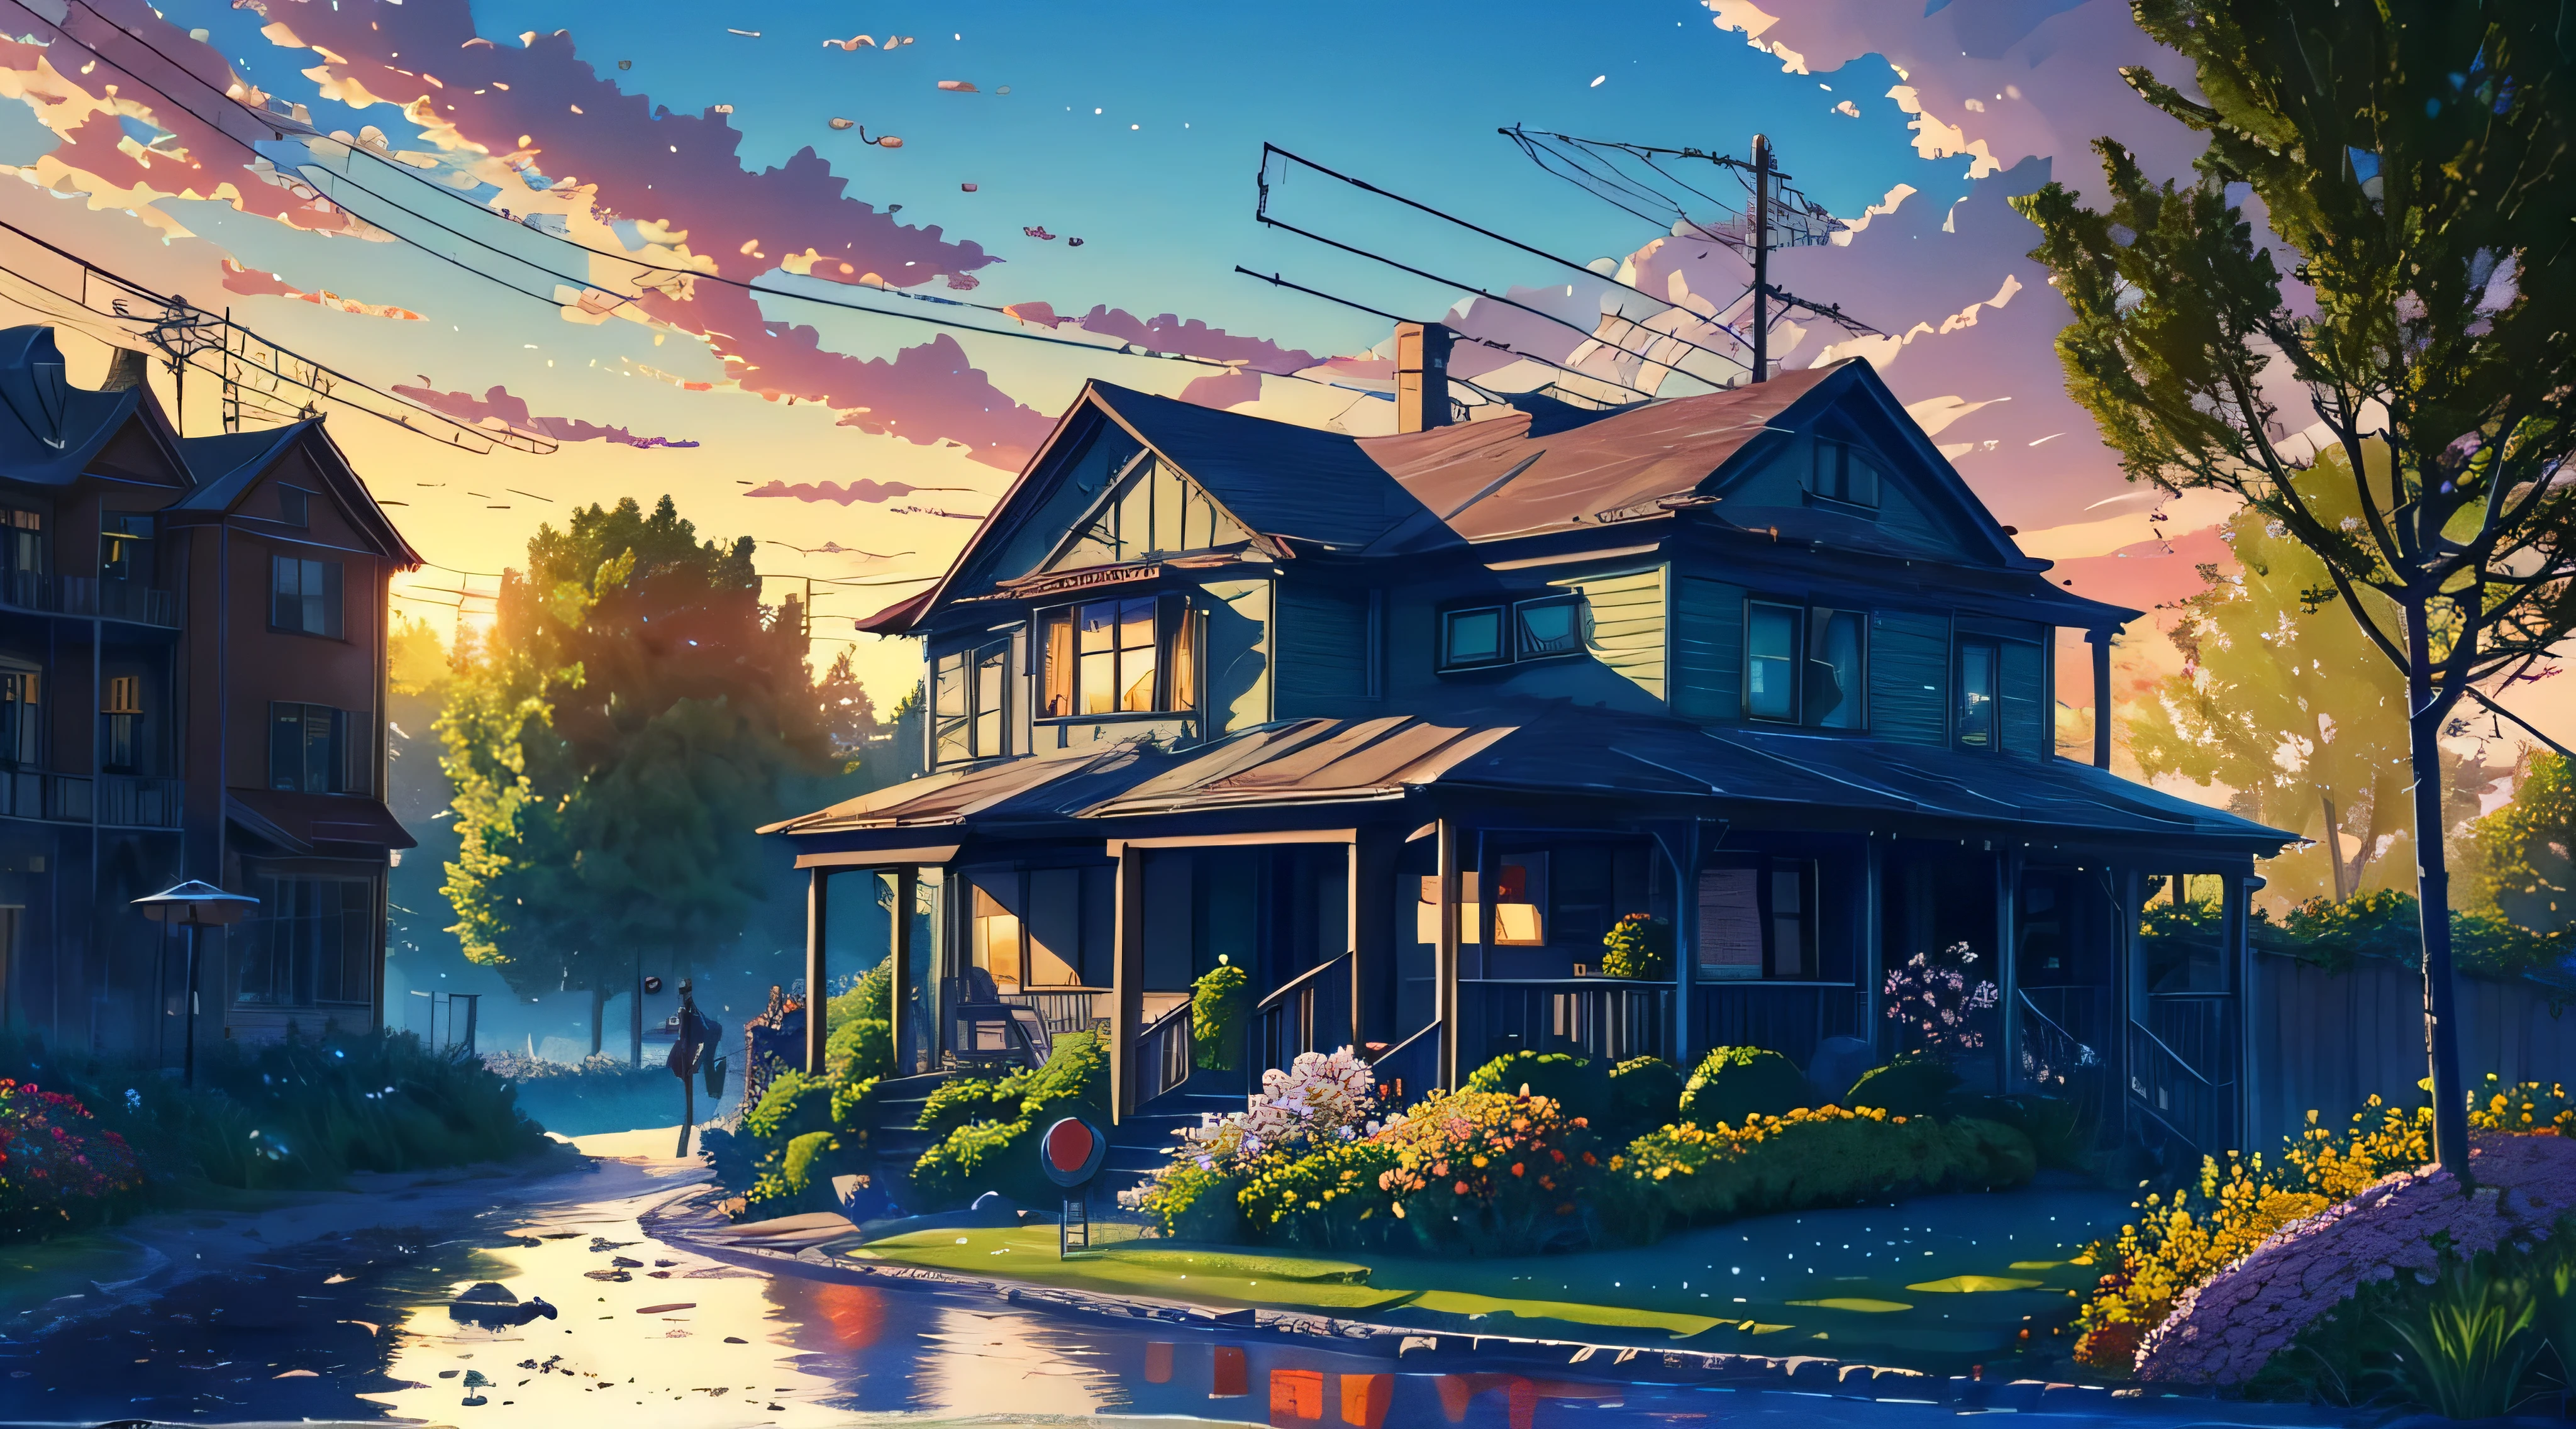 very cozy little place, hyper realism, (anime Makoto Shinkai:0.4), old shabby house in city street, home wiring, outdoors, sky, cloud, day, scenery, tree, blue sky, building, sign, wires, railing, wide shot, utility pole, town, wilderness, flowers, a lot of utensils lying around in a mess